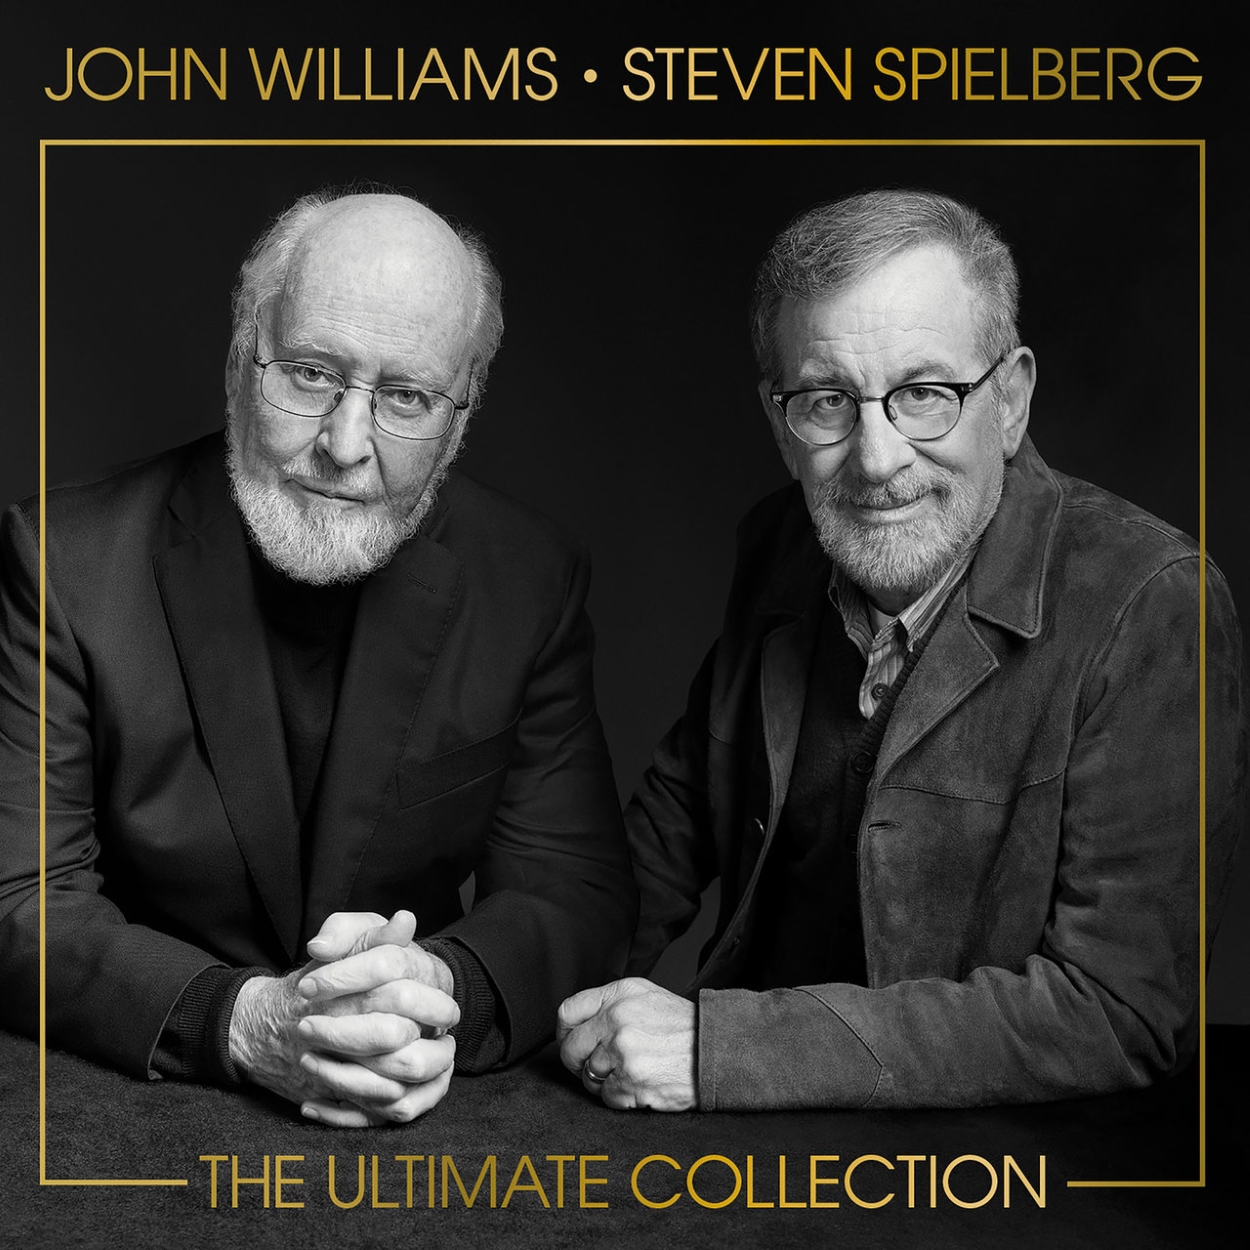 John Williams and Steven Spielberg – The Ultimate Collection